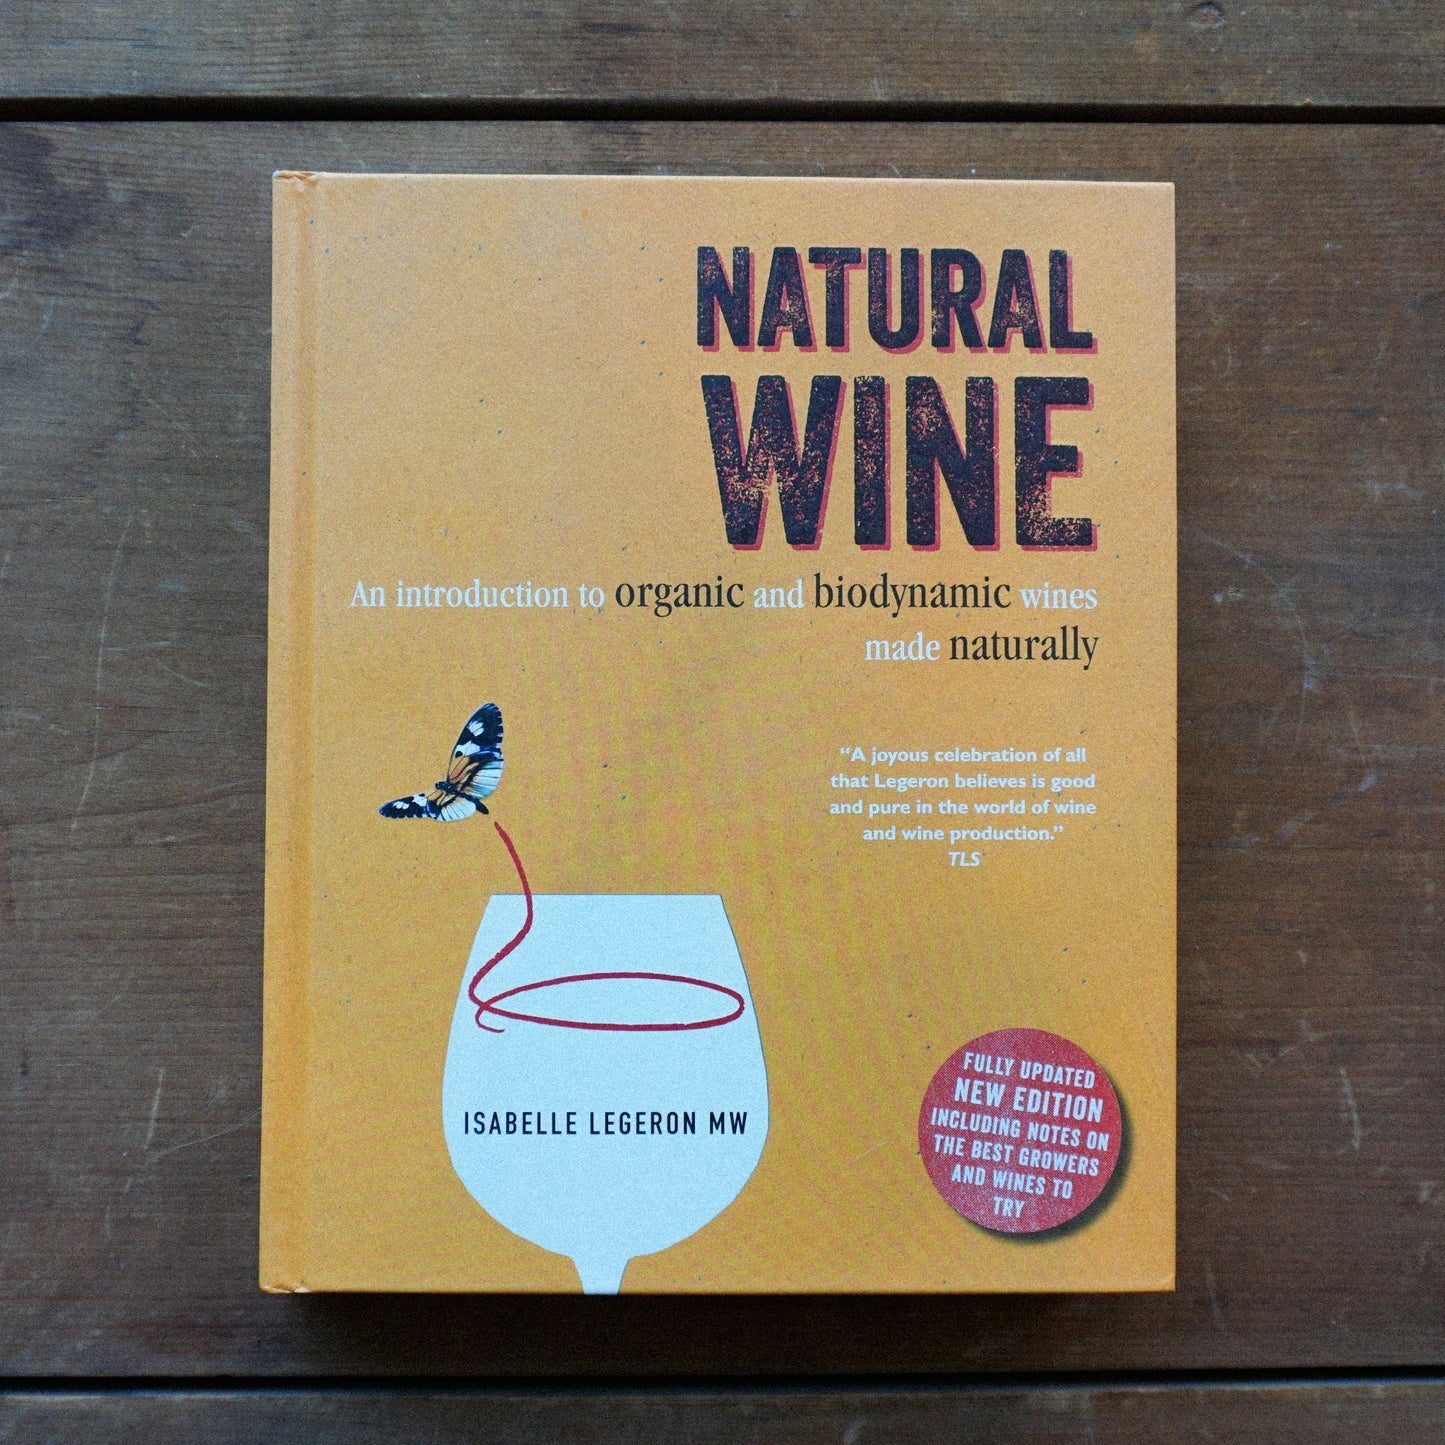 Natural Wine: An Introduction to Organic and Biodynamic Wines made Naturally